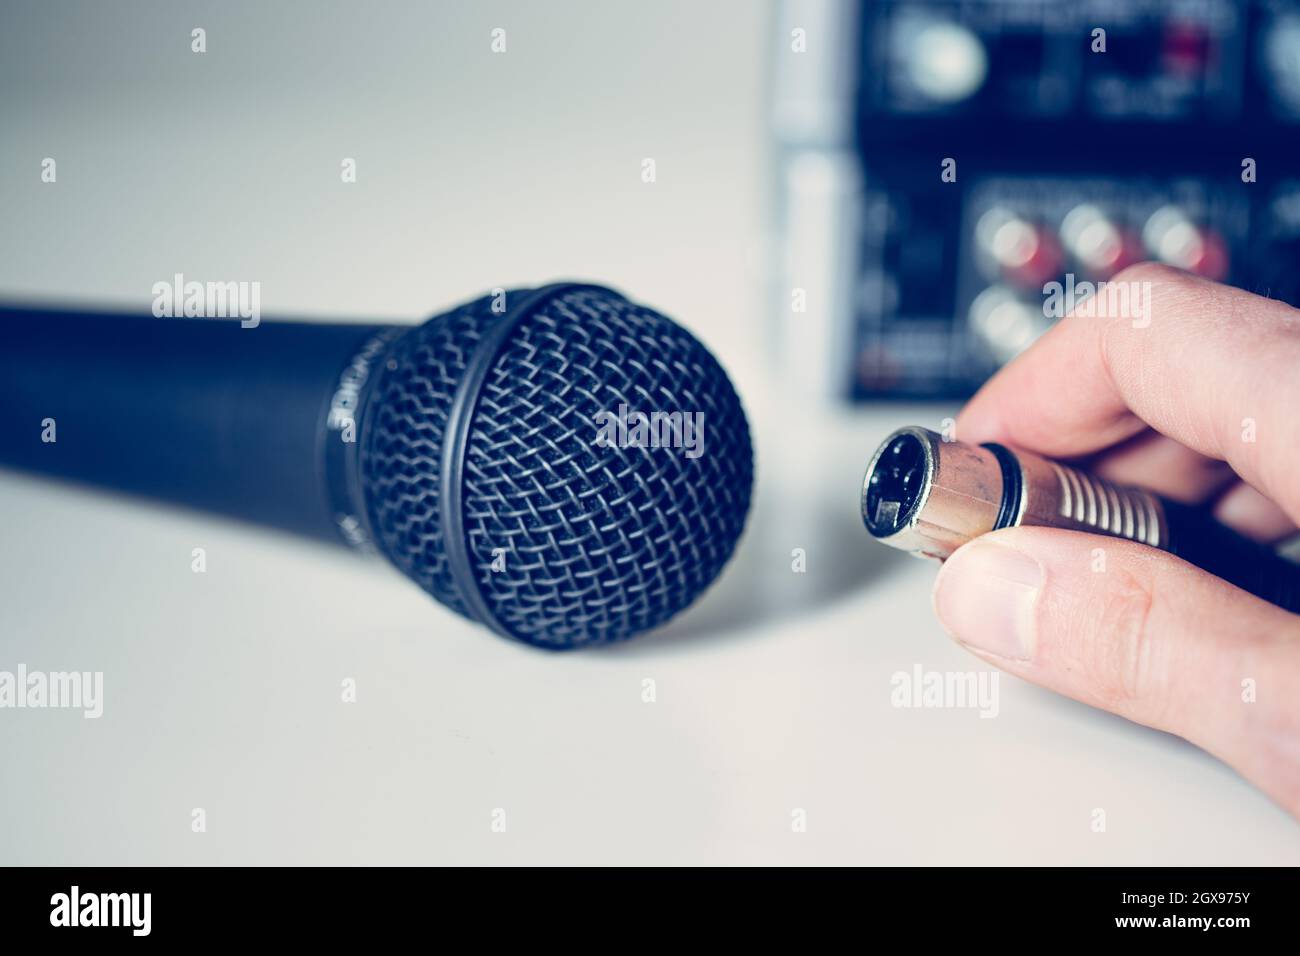 Close up picture of holding in hand microphone and audio cable, mixer in the blurry background Stock Photo